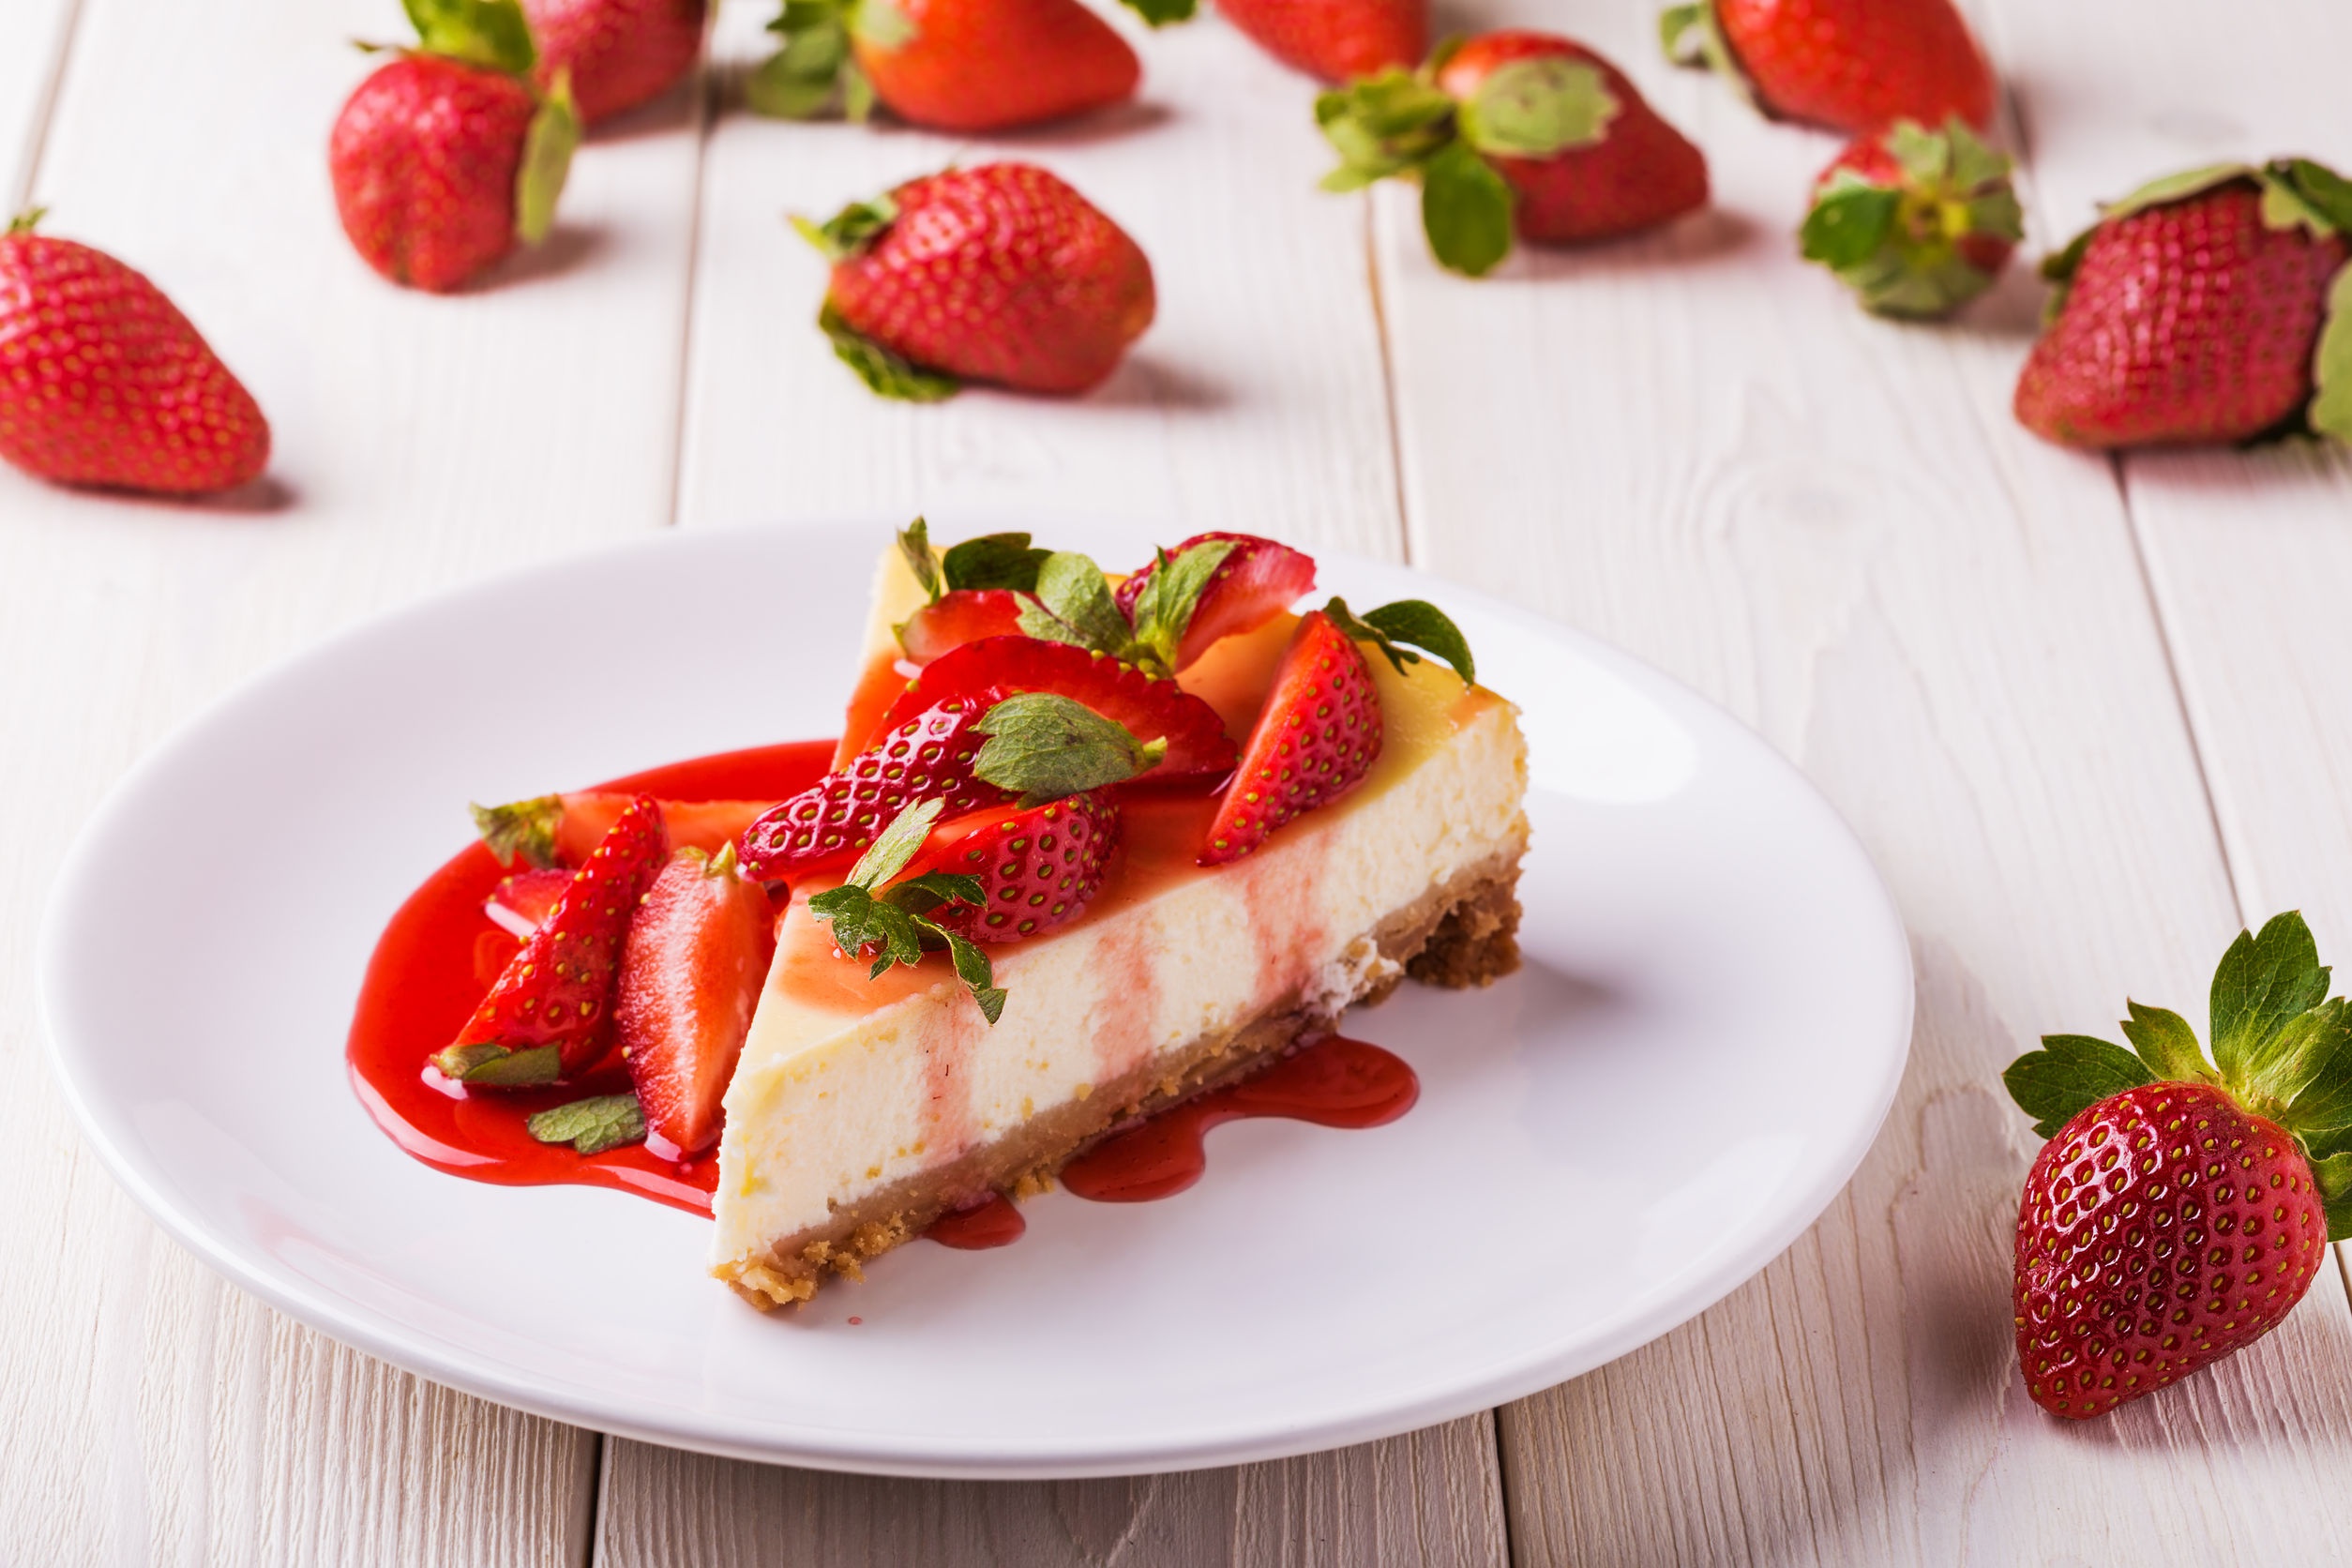 Cheesecake Fruit Pastry Still Life Strawberry 2508x1672